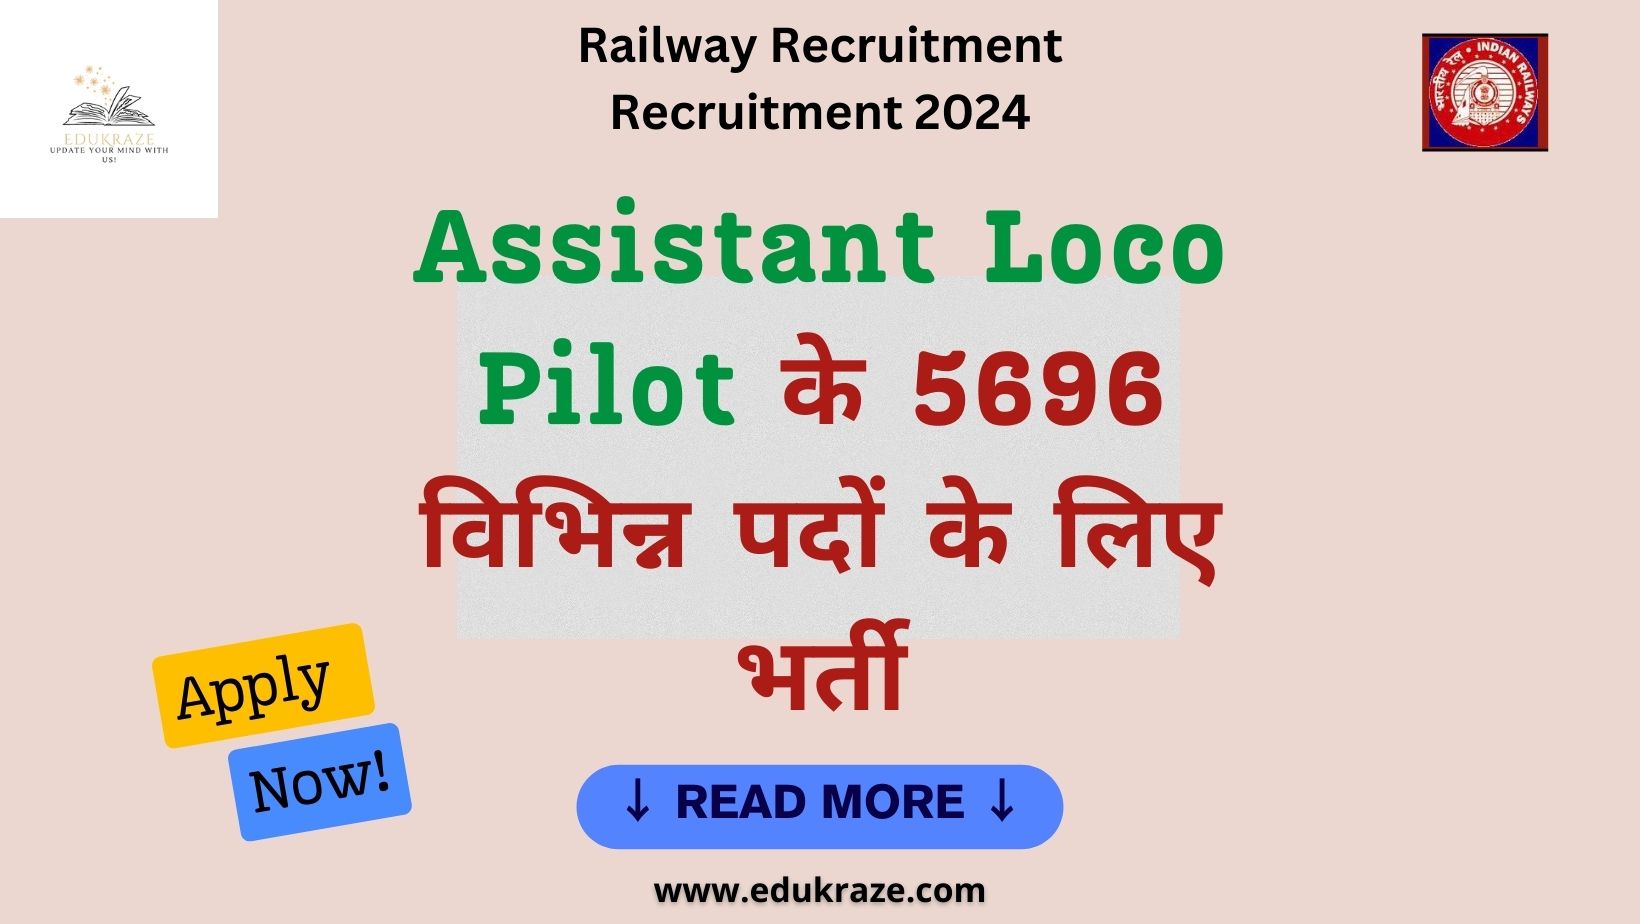 Railway Recruitment Out for Assistant Loco Pilot , Apply Online for 5696 Post